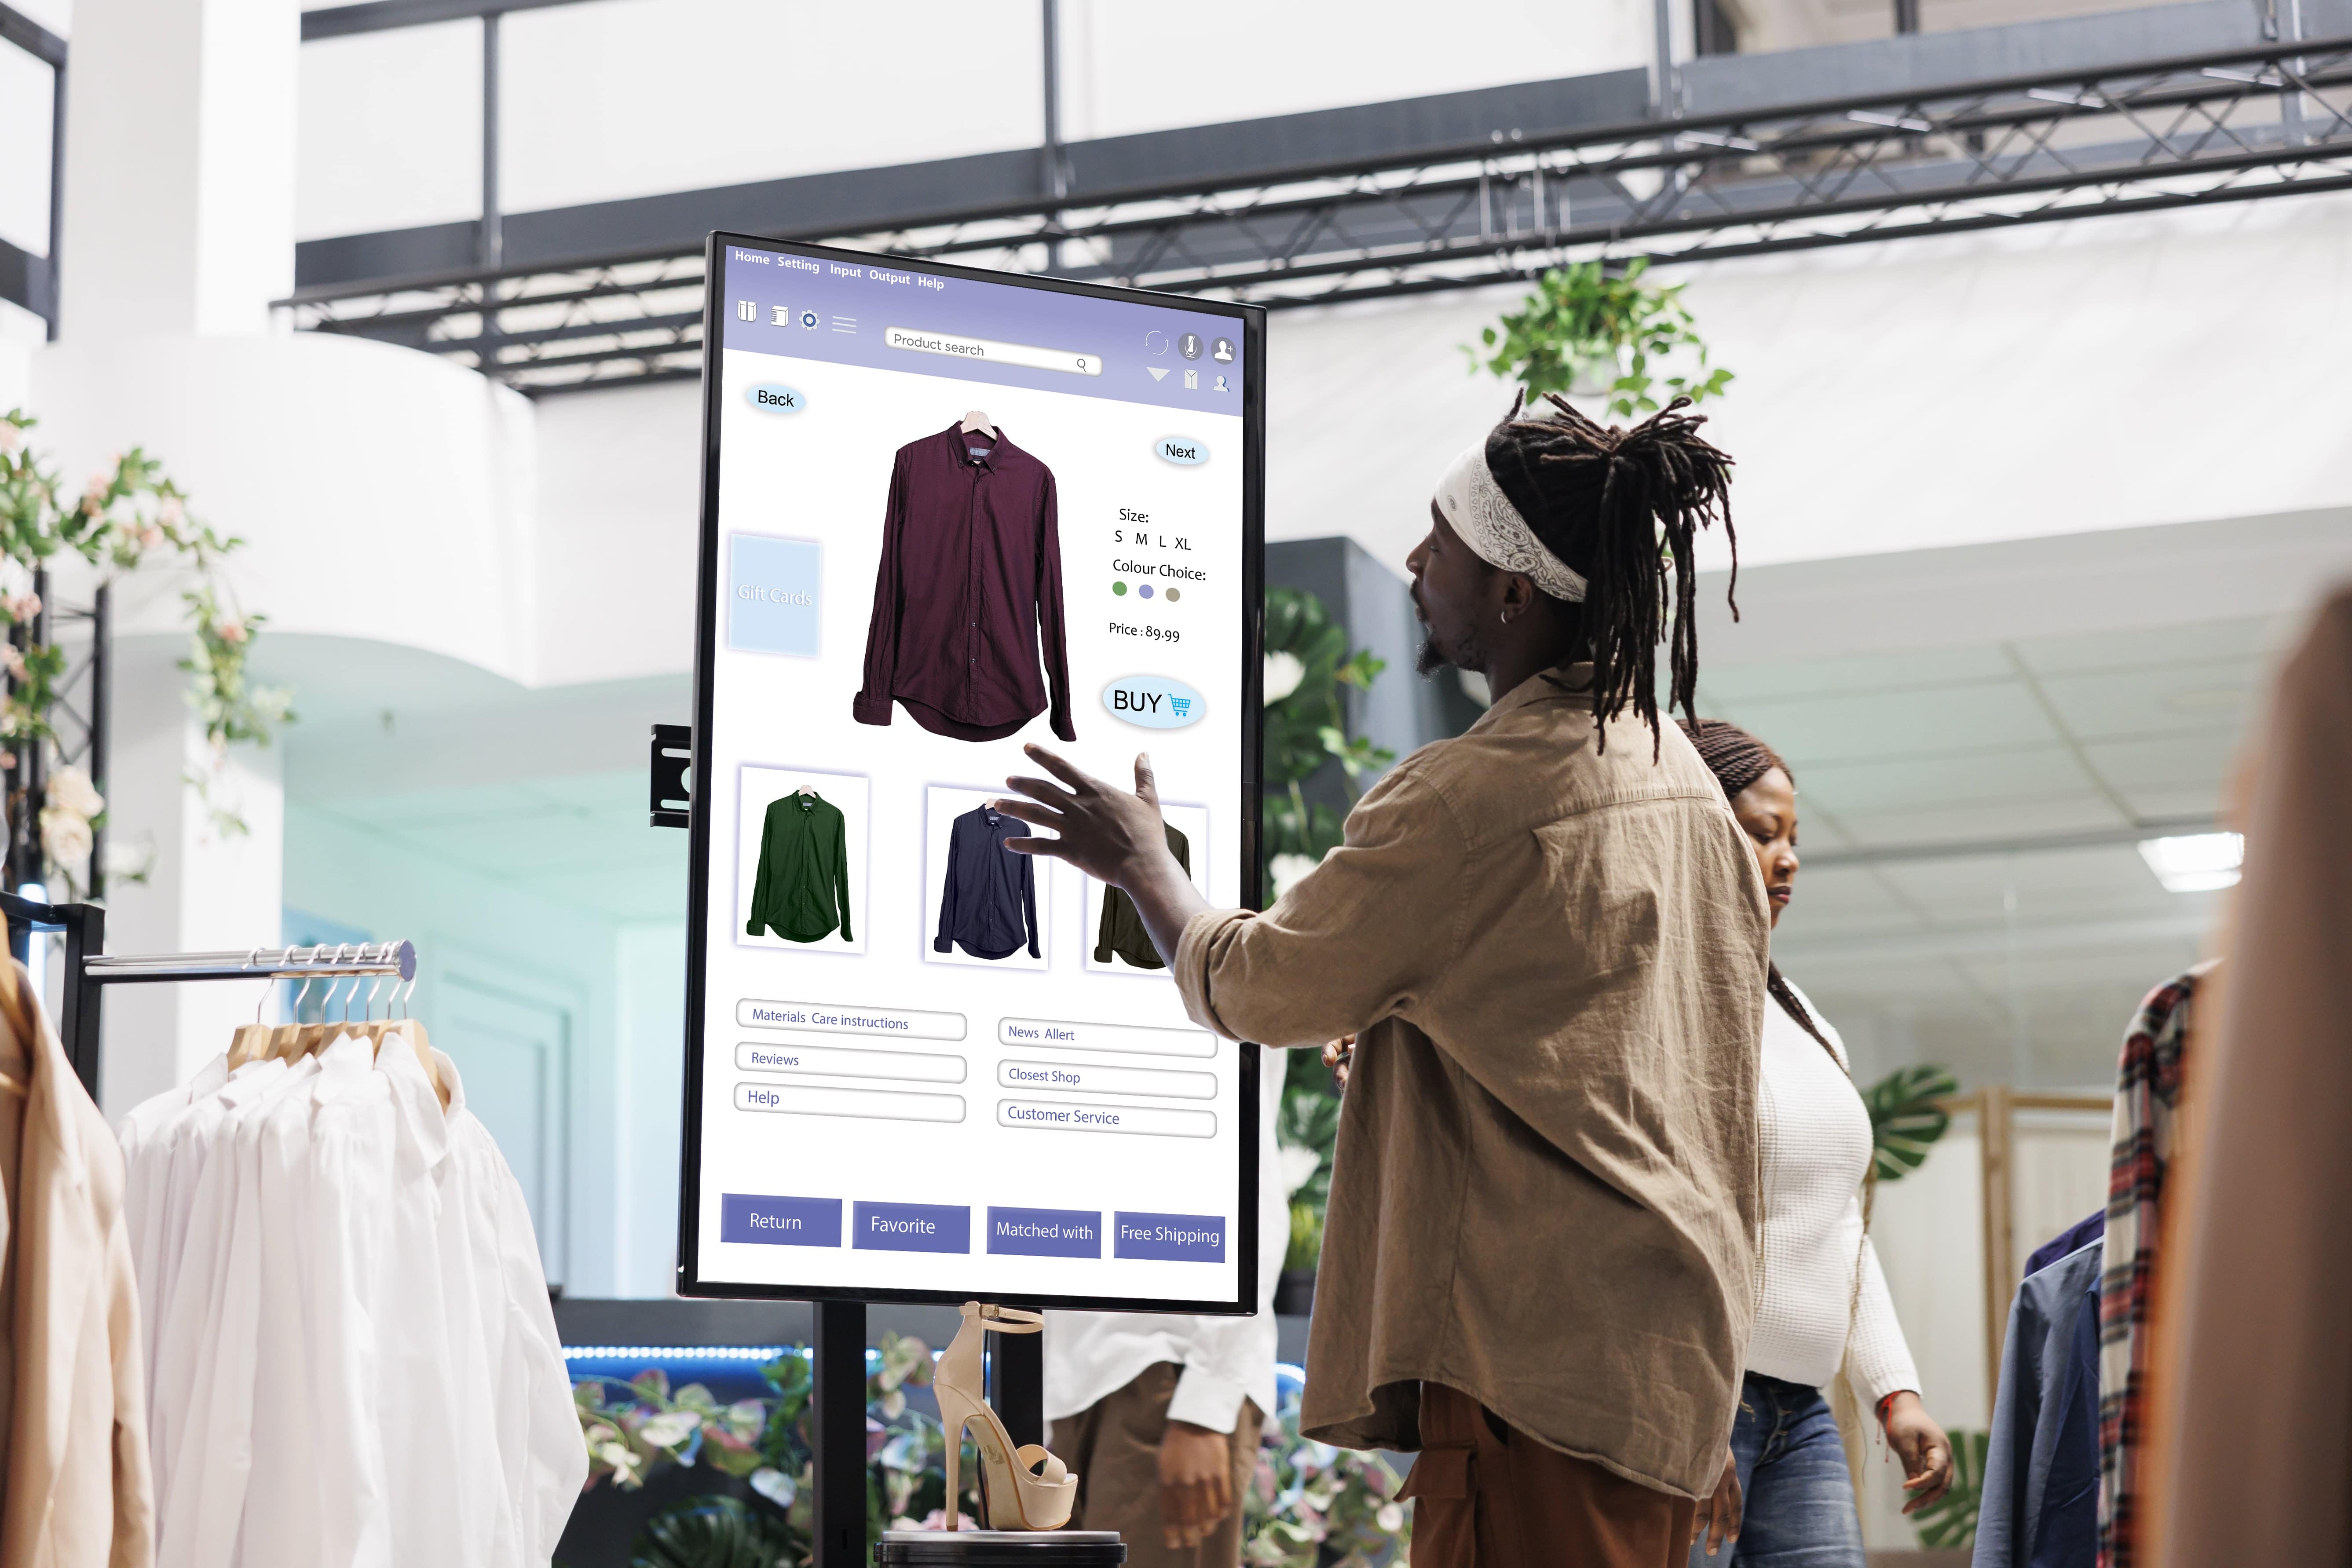 in-store promotional displays, a customer interacting with a digital display board.